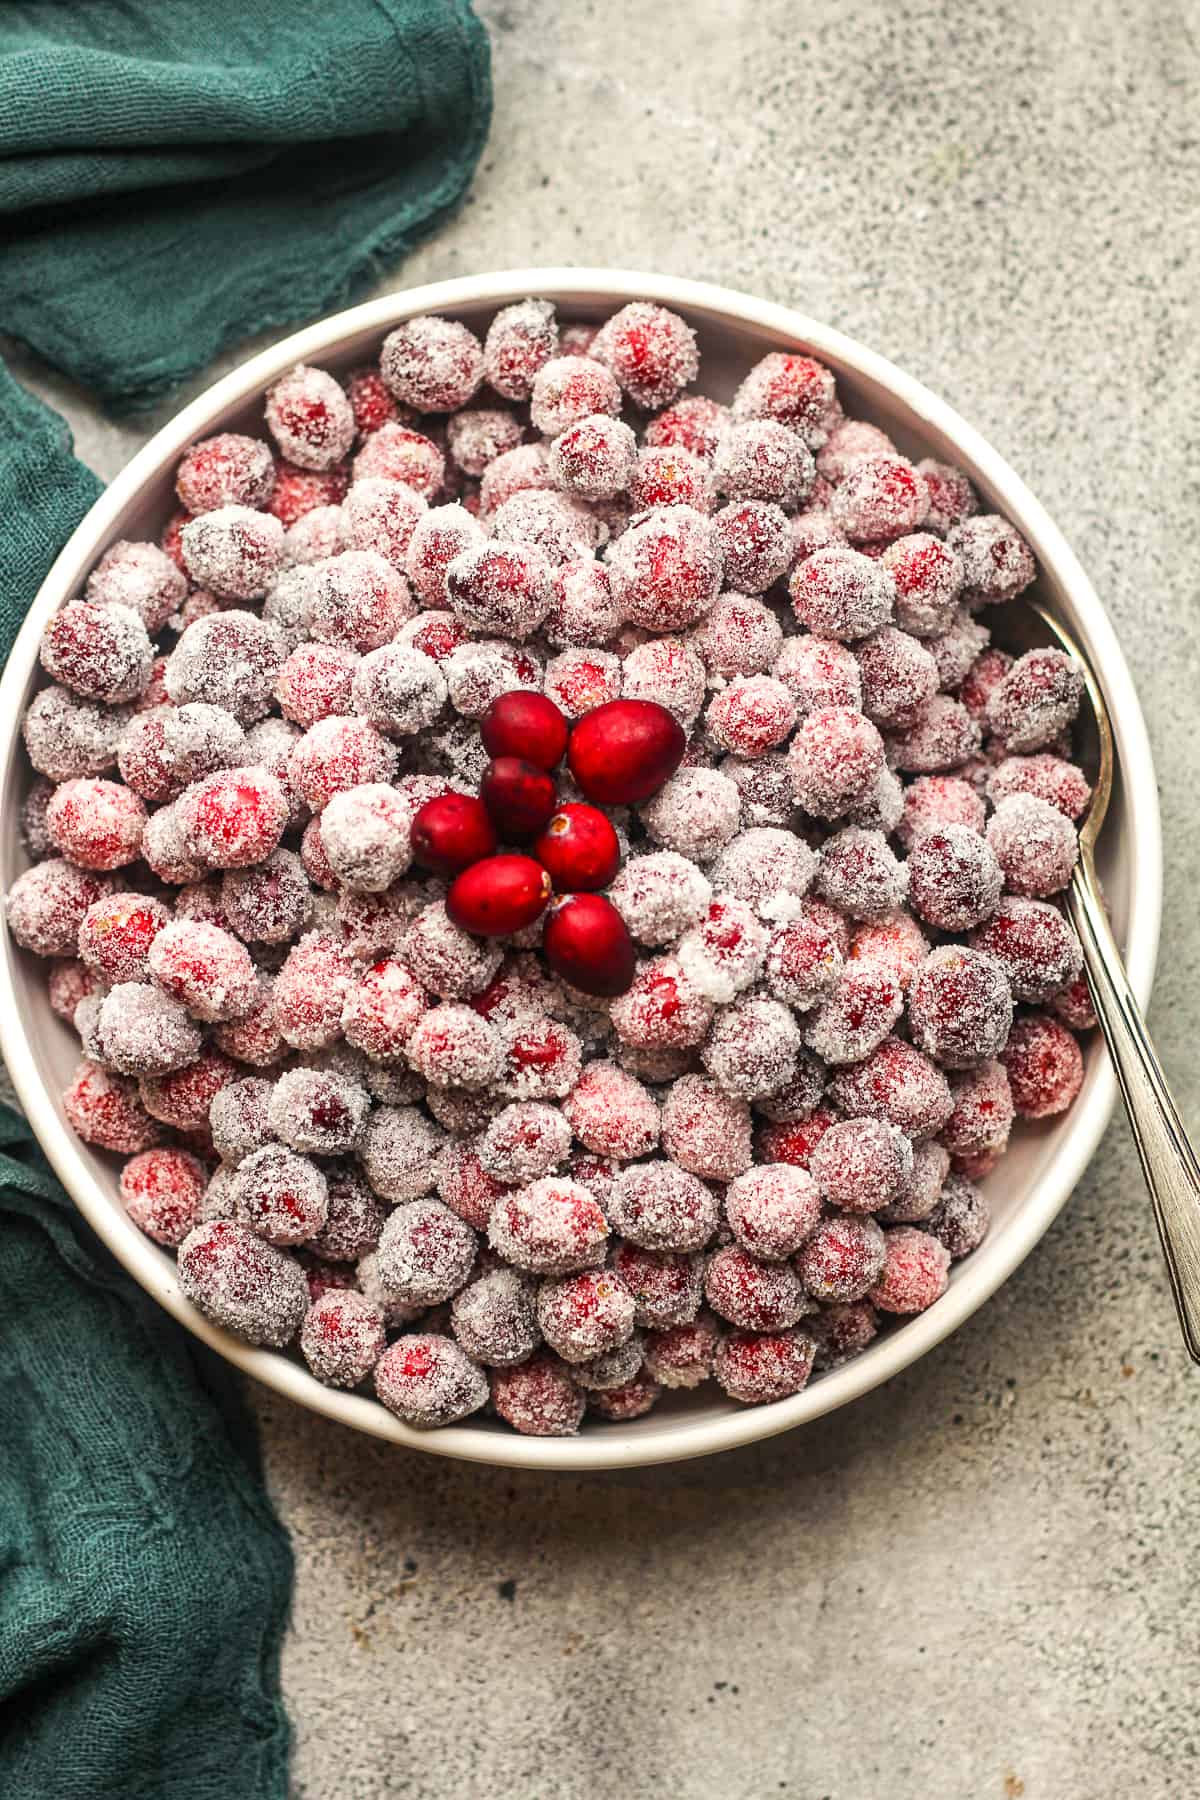 Overhead view of a bowl of sugared cranberries with a green napkin.